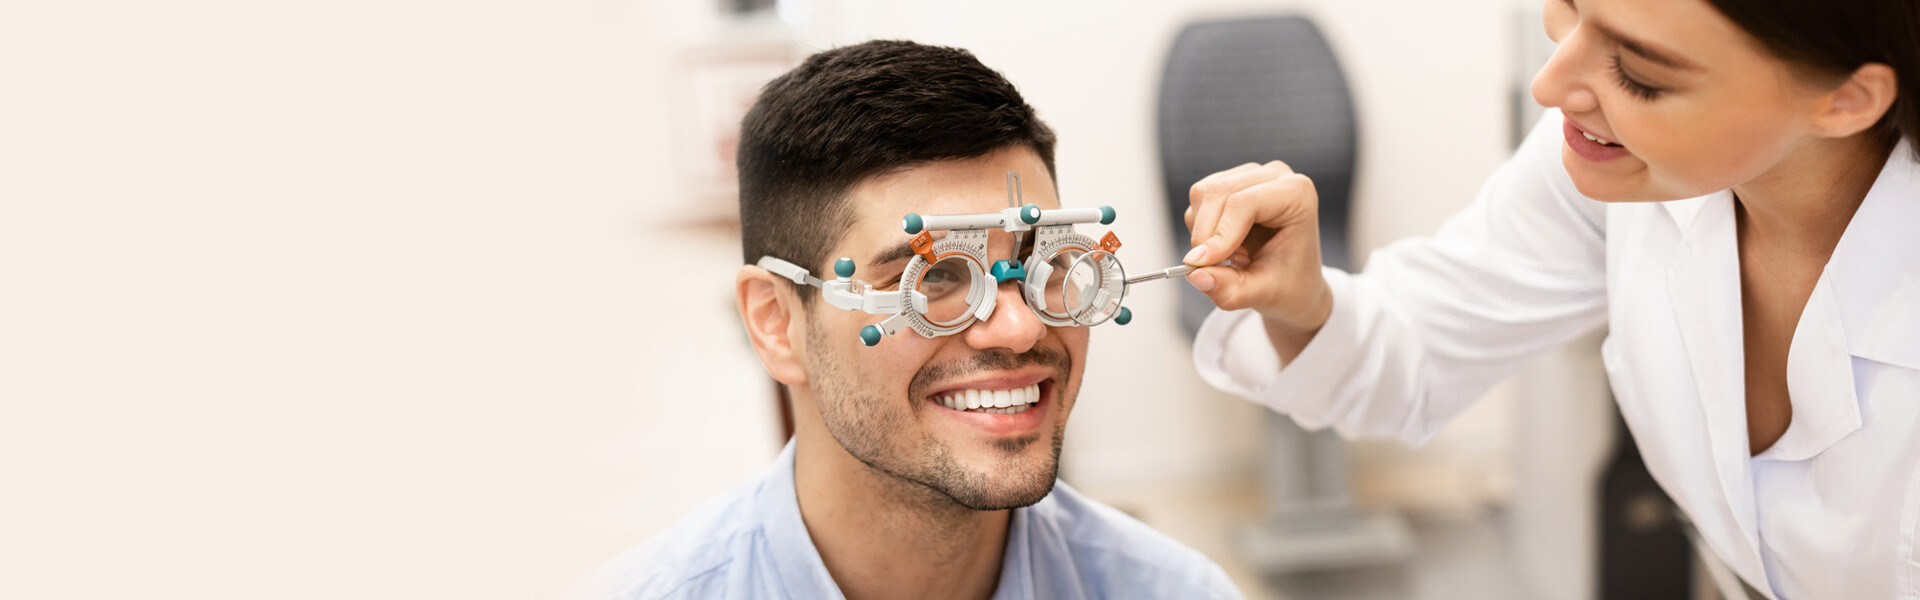 Visiting an Optician: What to Expect During Your First Visit?